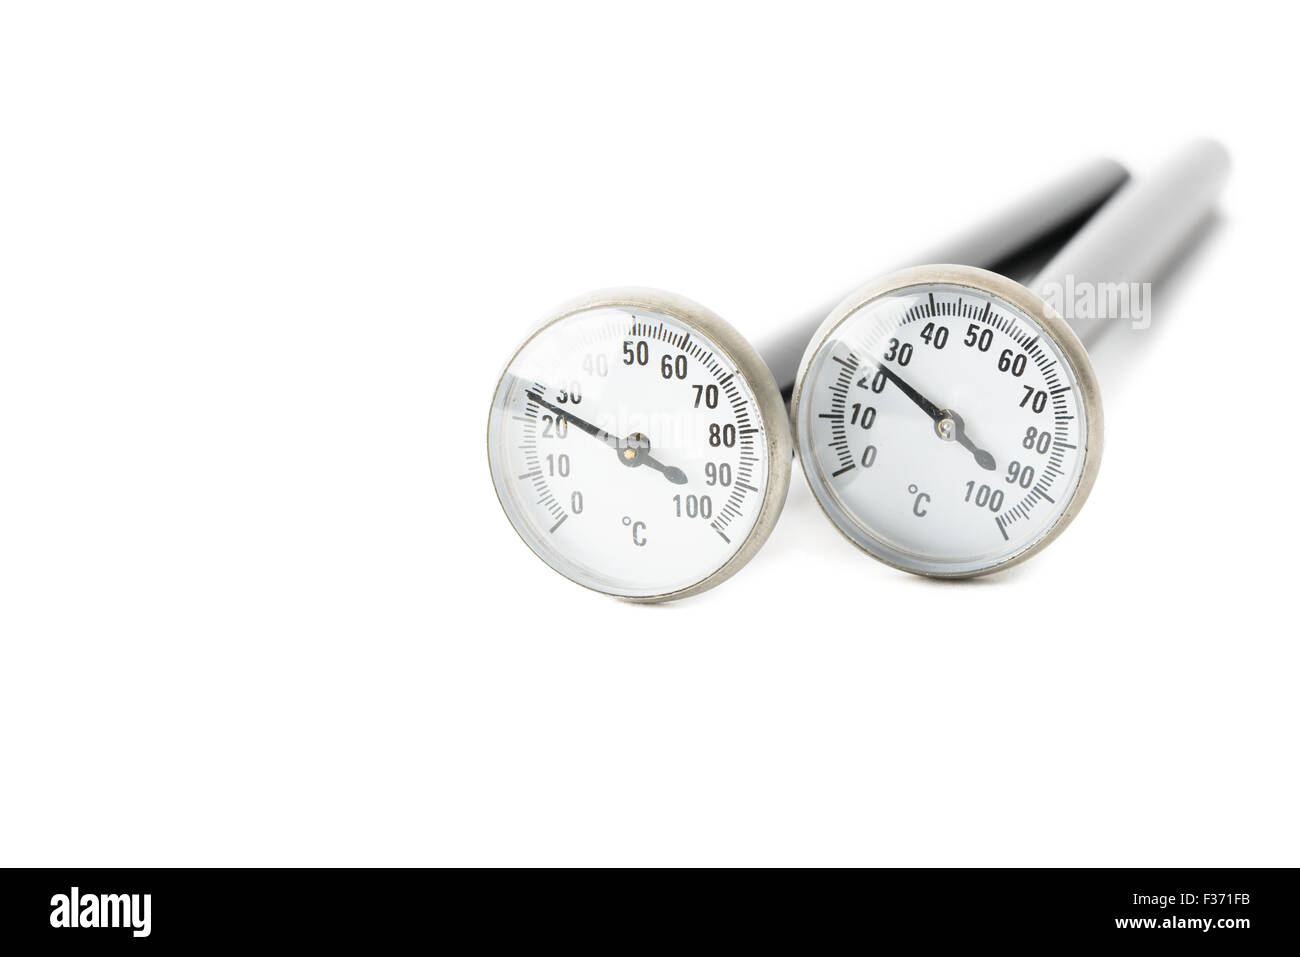 https://c8.alamy.com/comp/F371FB/close-up-of-cooking-thermometer-and-gauge-isolated-on-white-F371FB.jpg